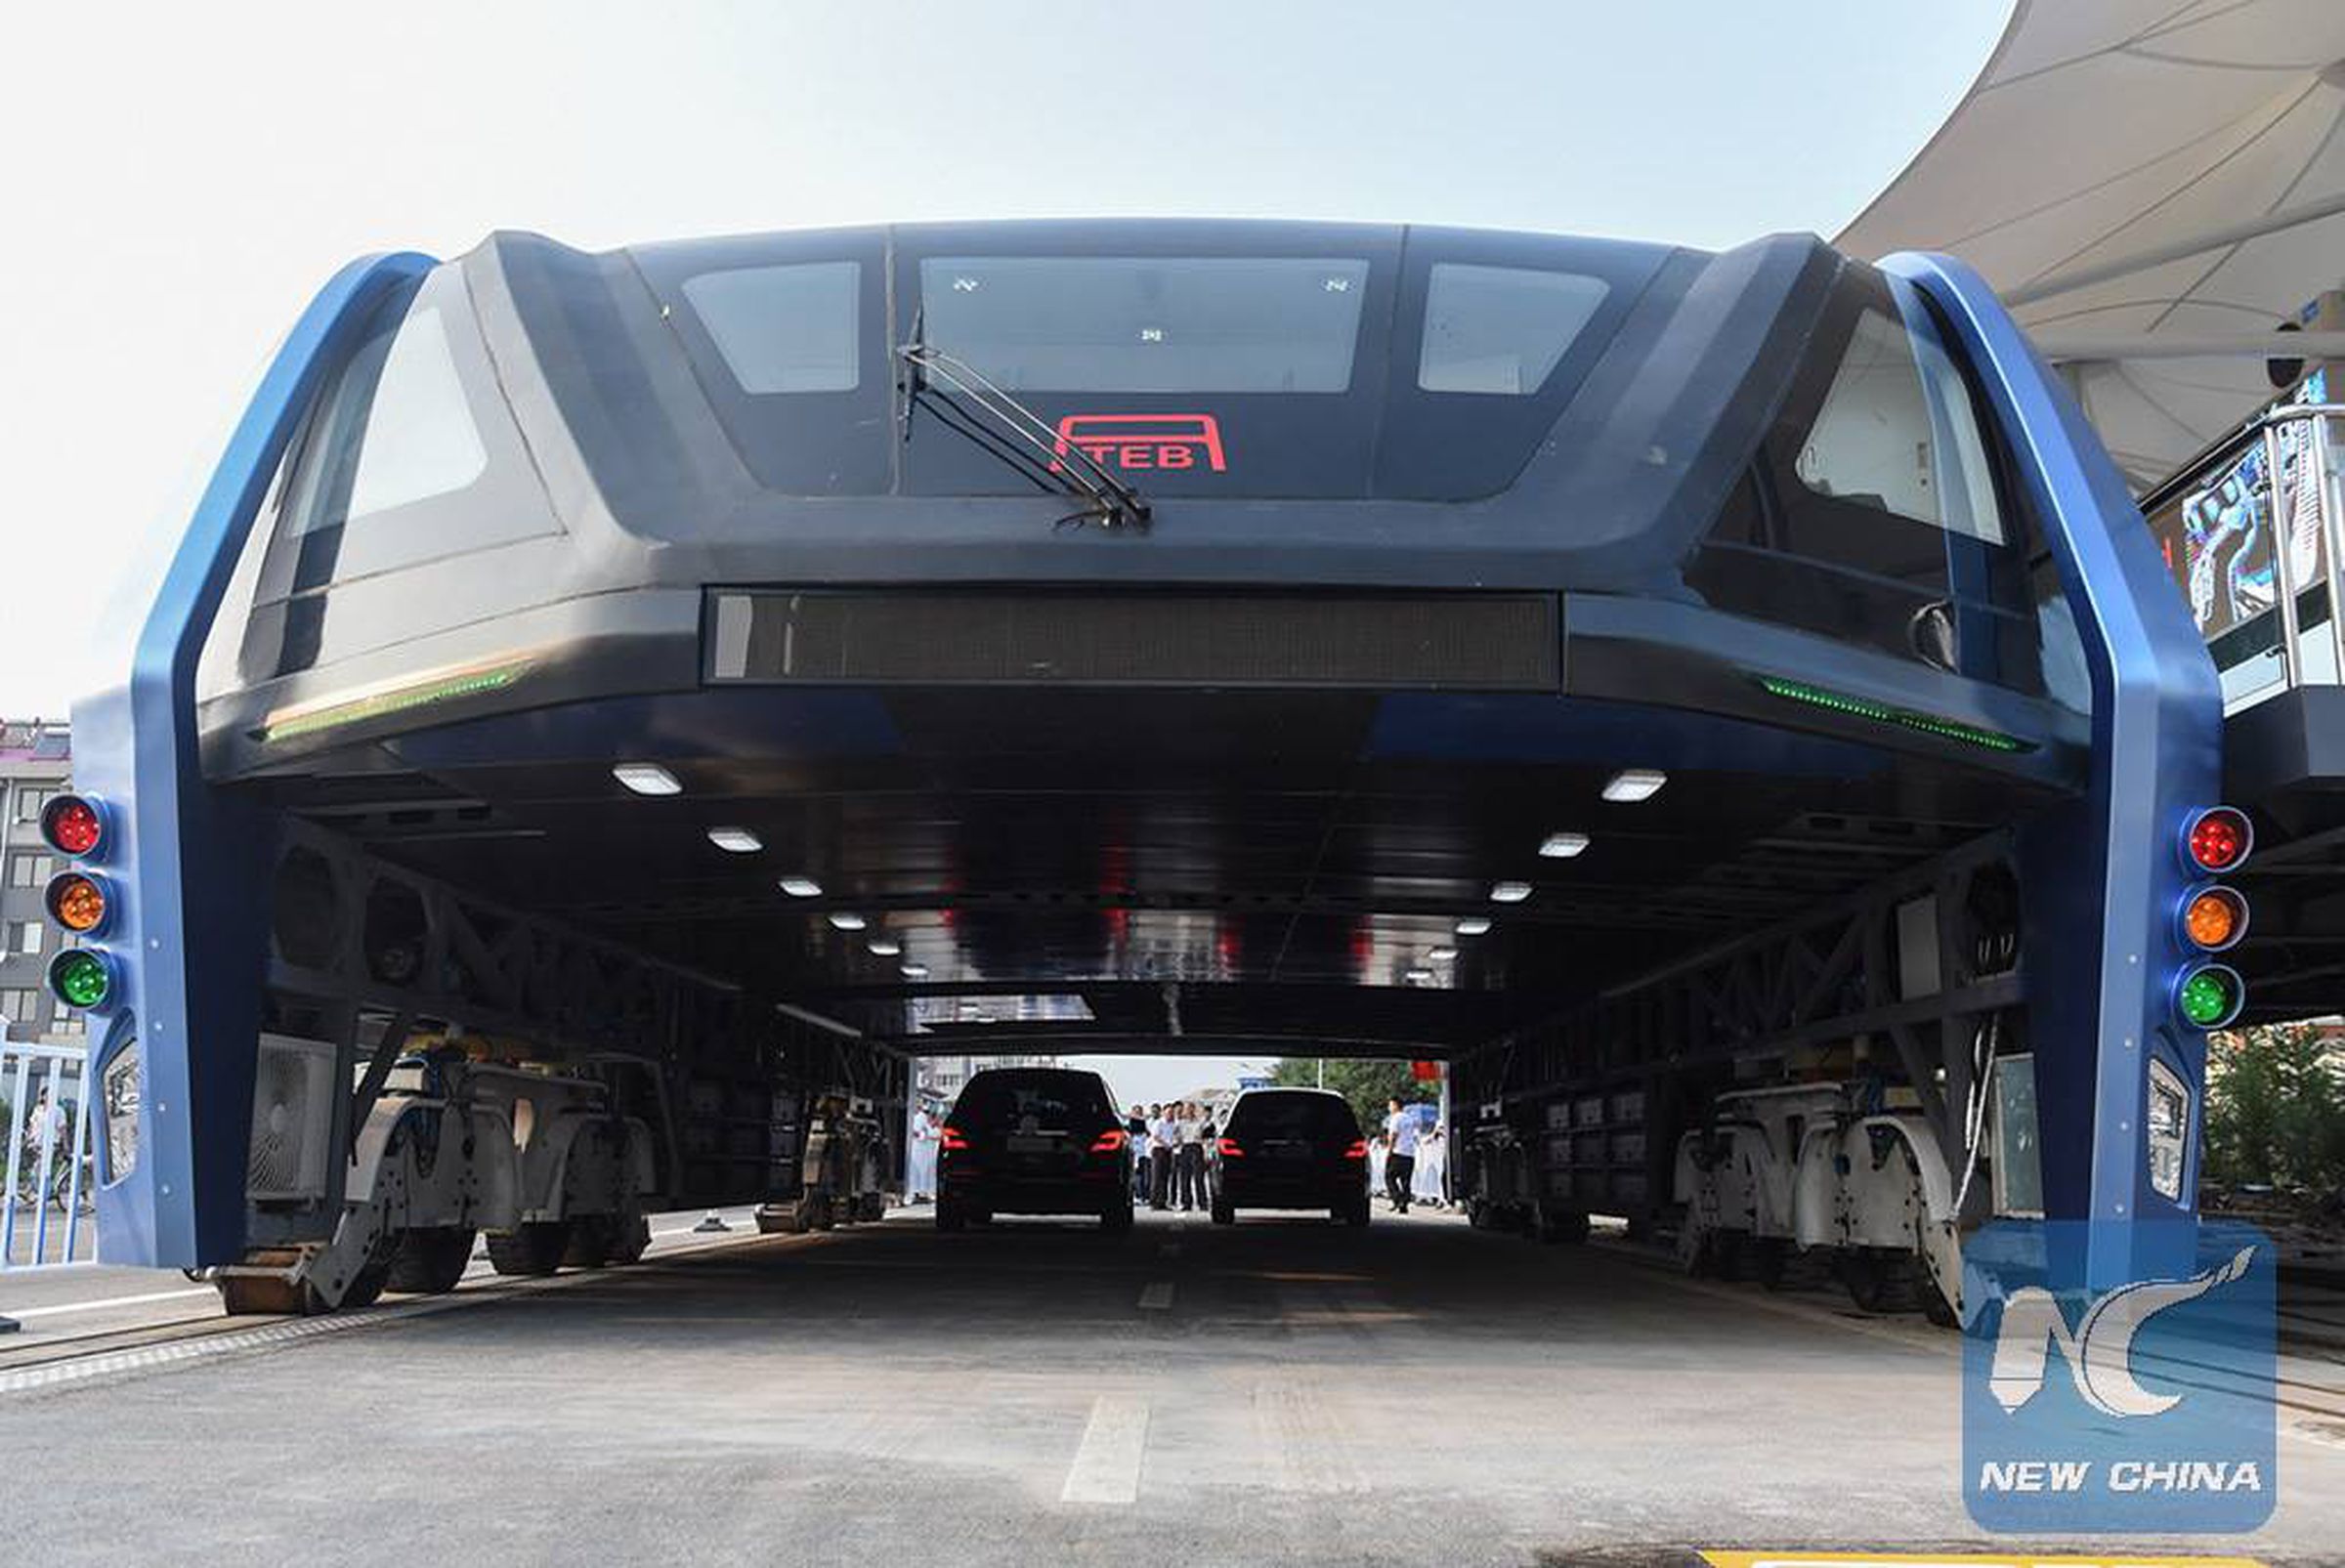 Chinese elevated bus gallery